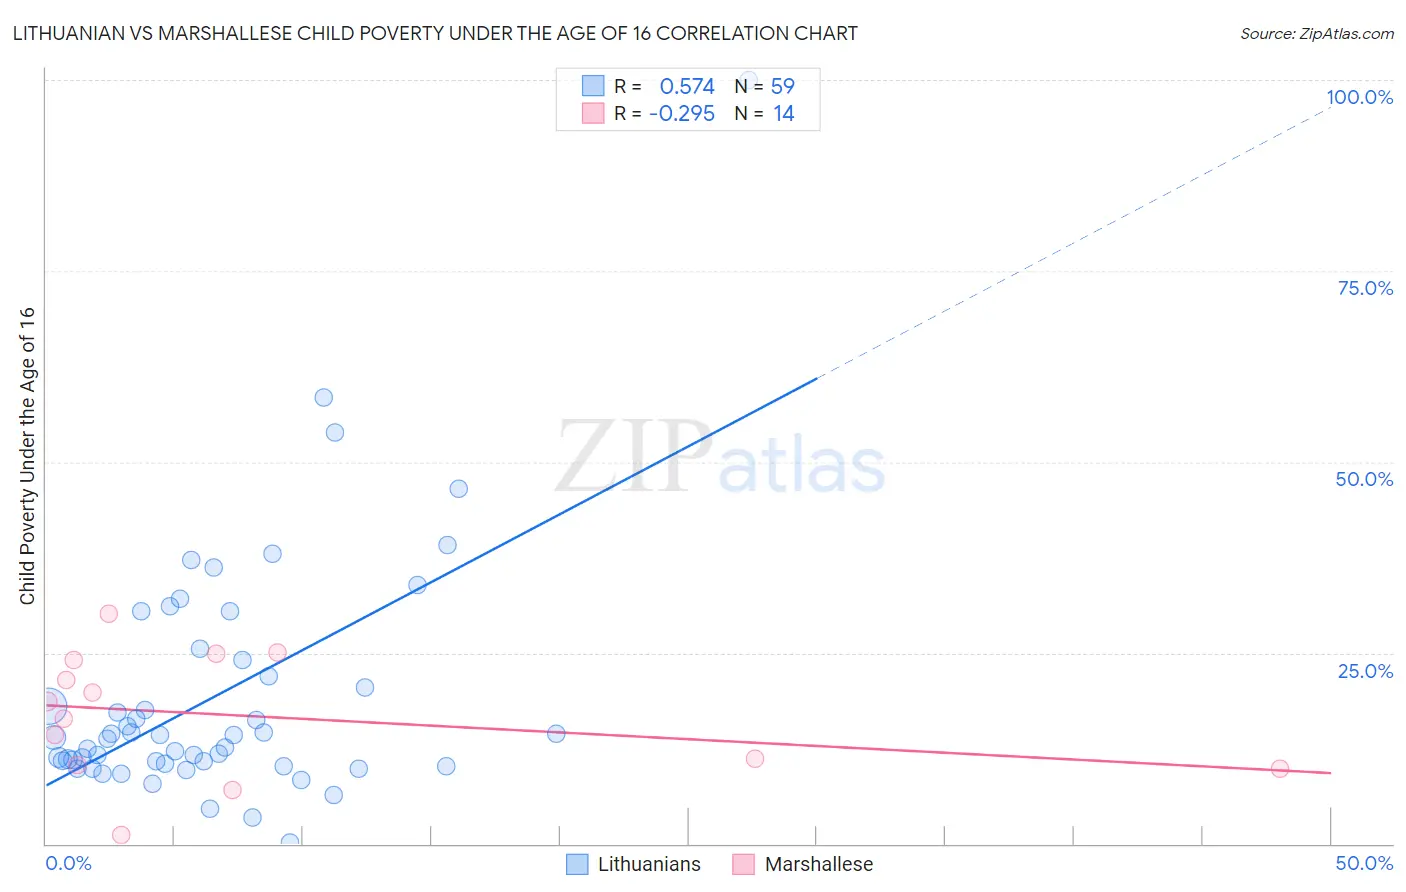 Lithuanian vs Marshallese Child Poverty Under the Age of 16